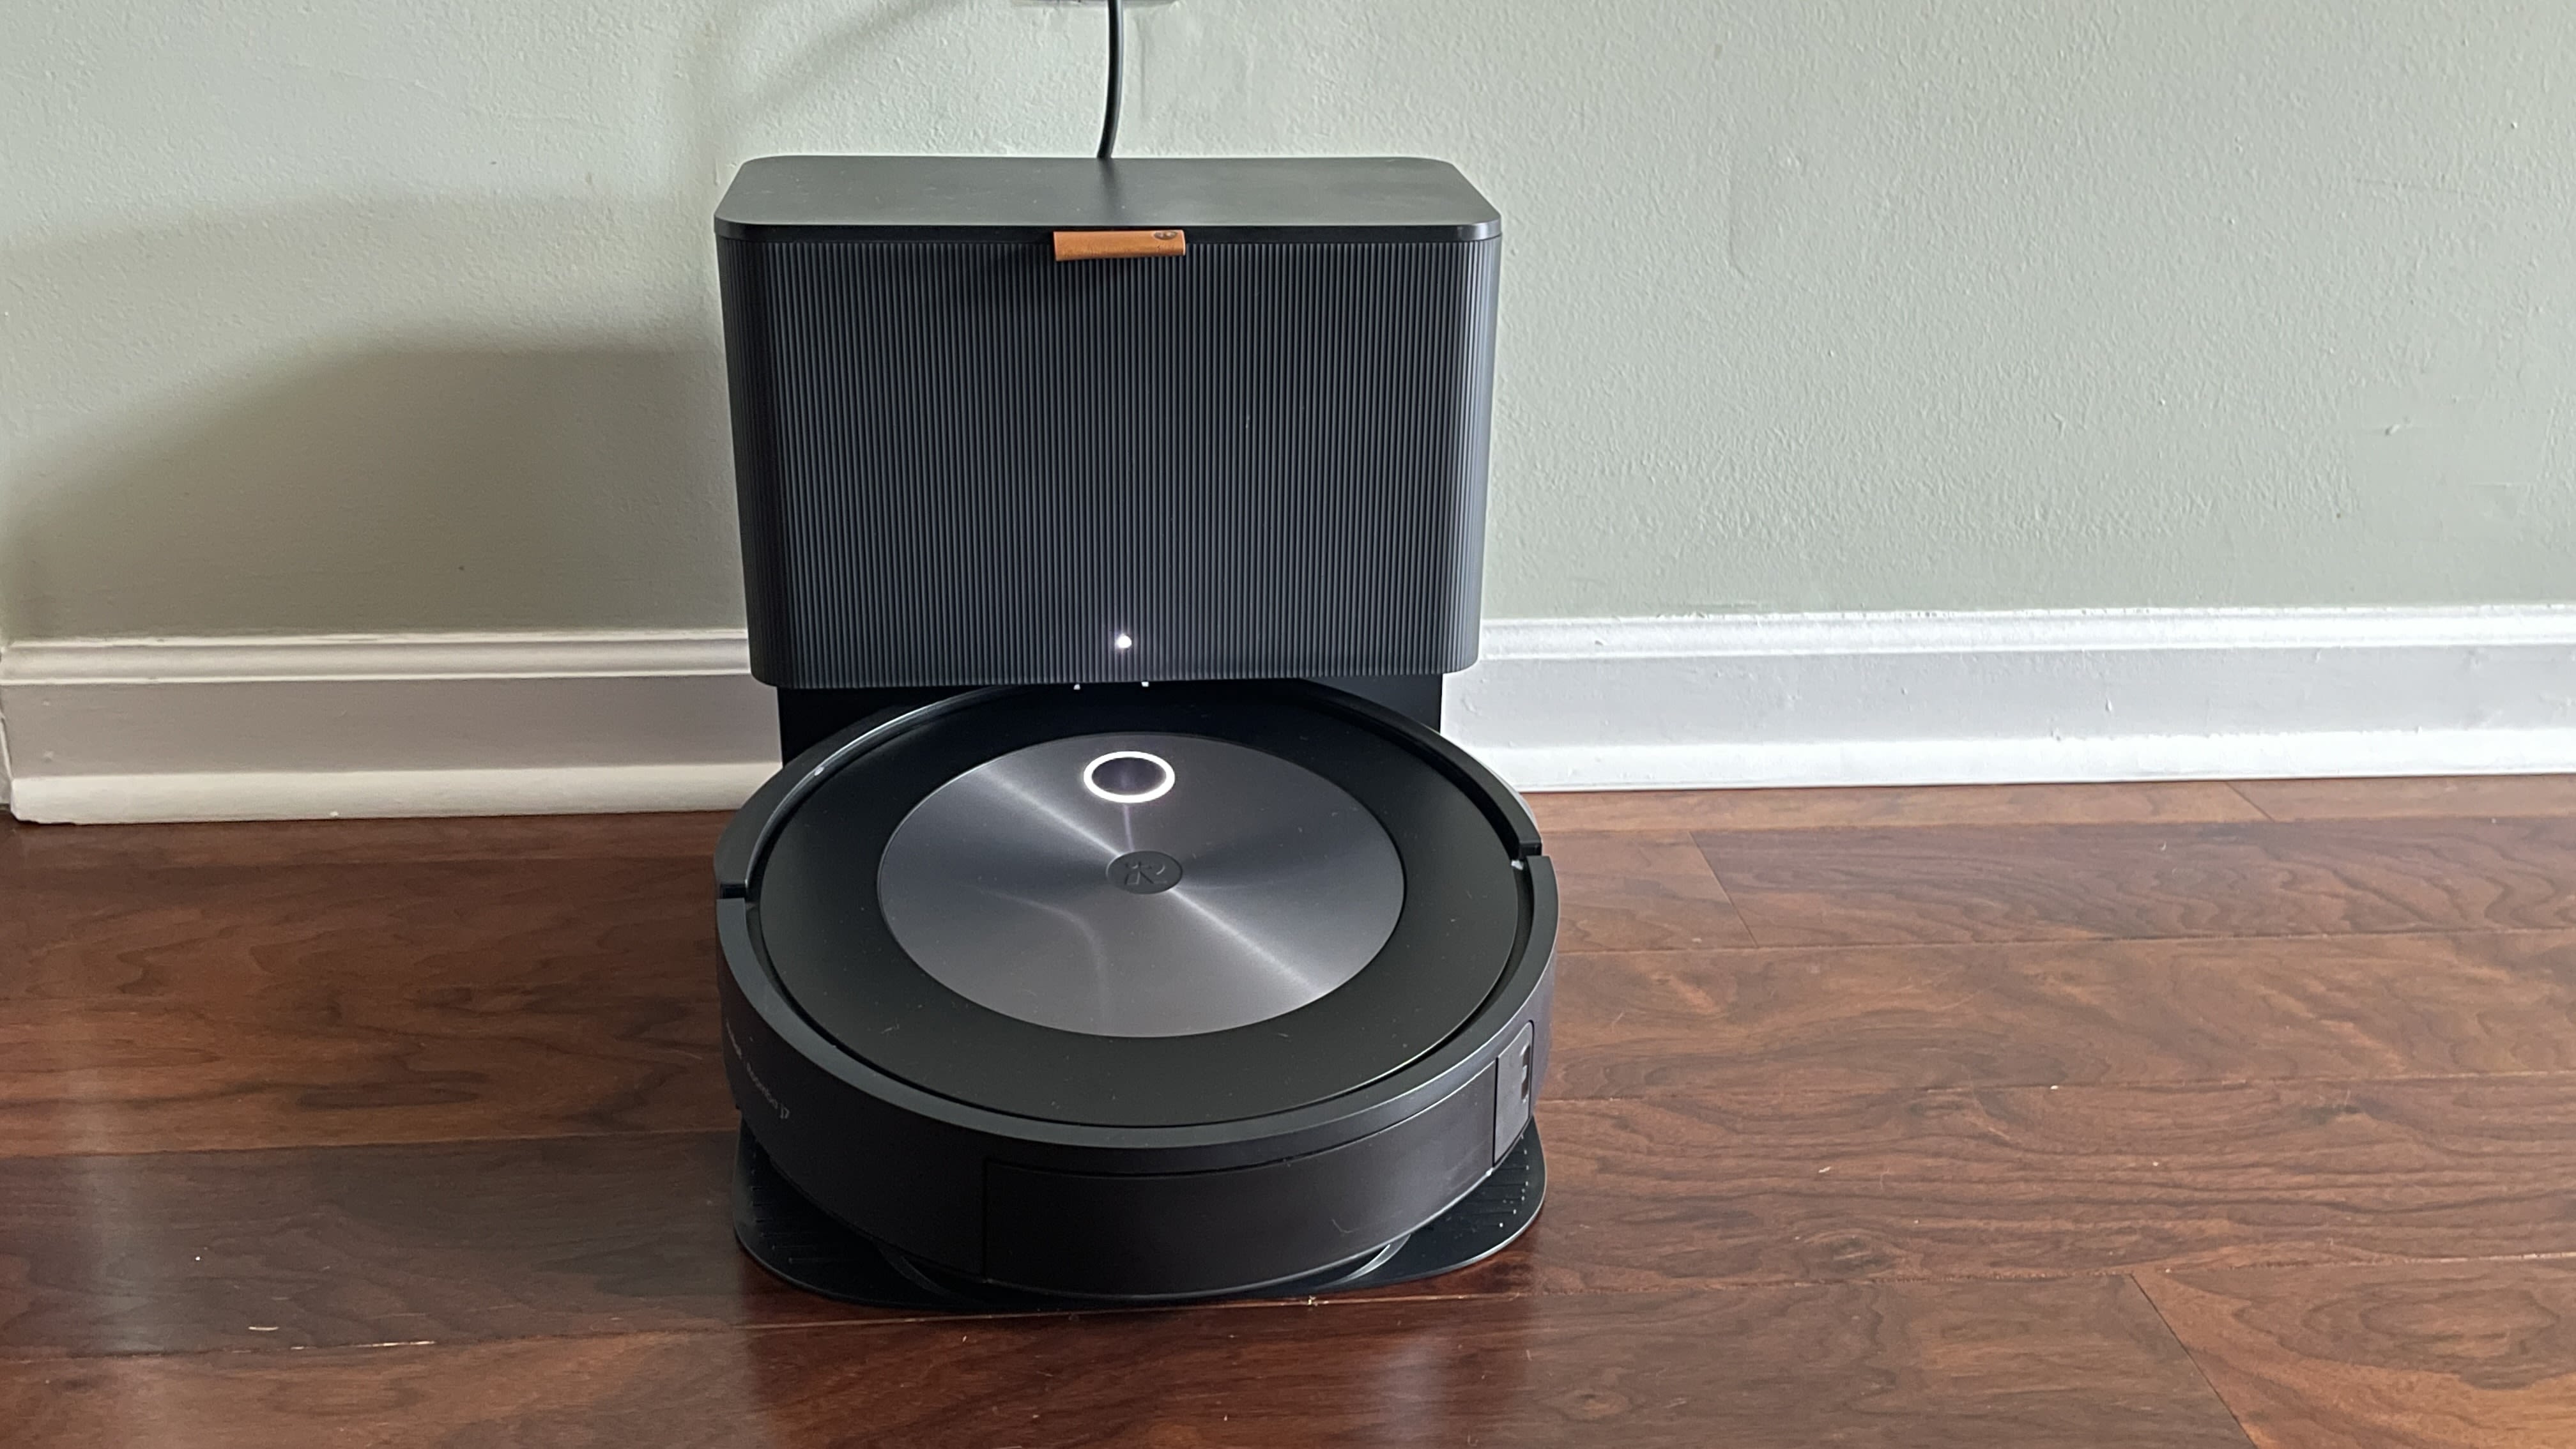 You can get up to $200 off of the iRobot Roomba j7 and iRobot